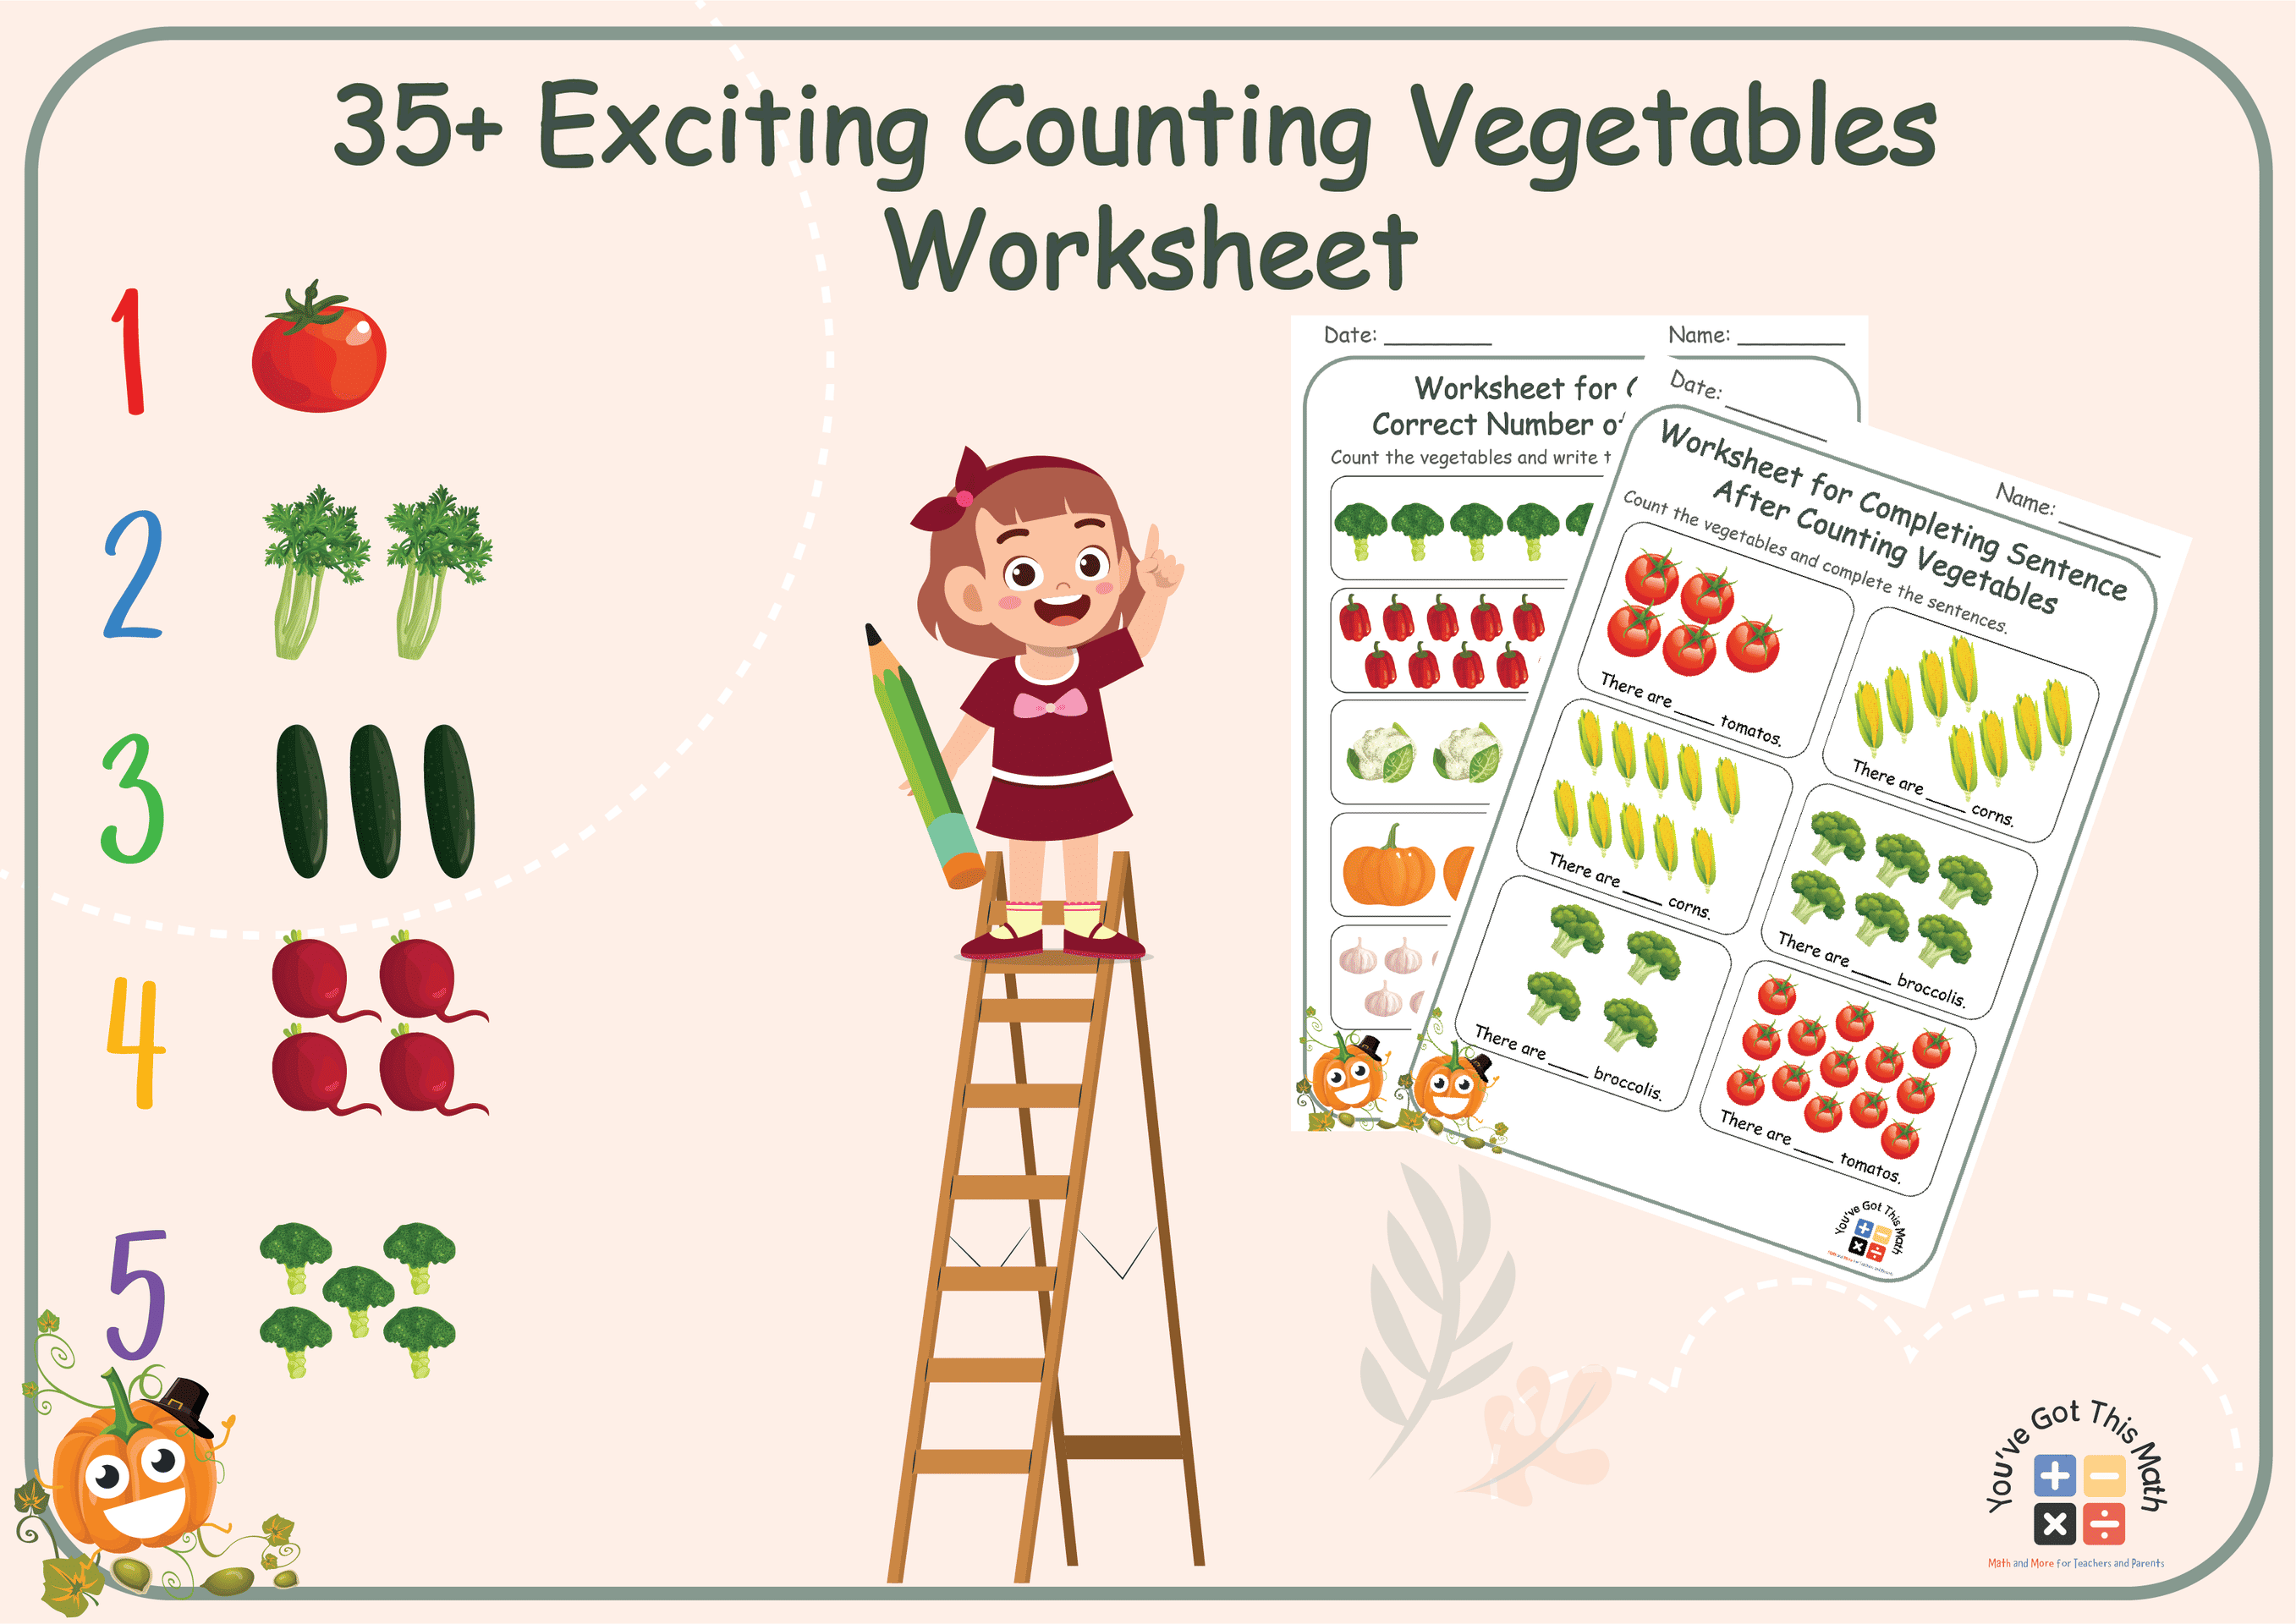 35+ Exciting Counting Vegetables Worksheet